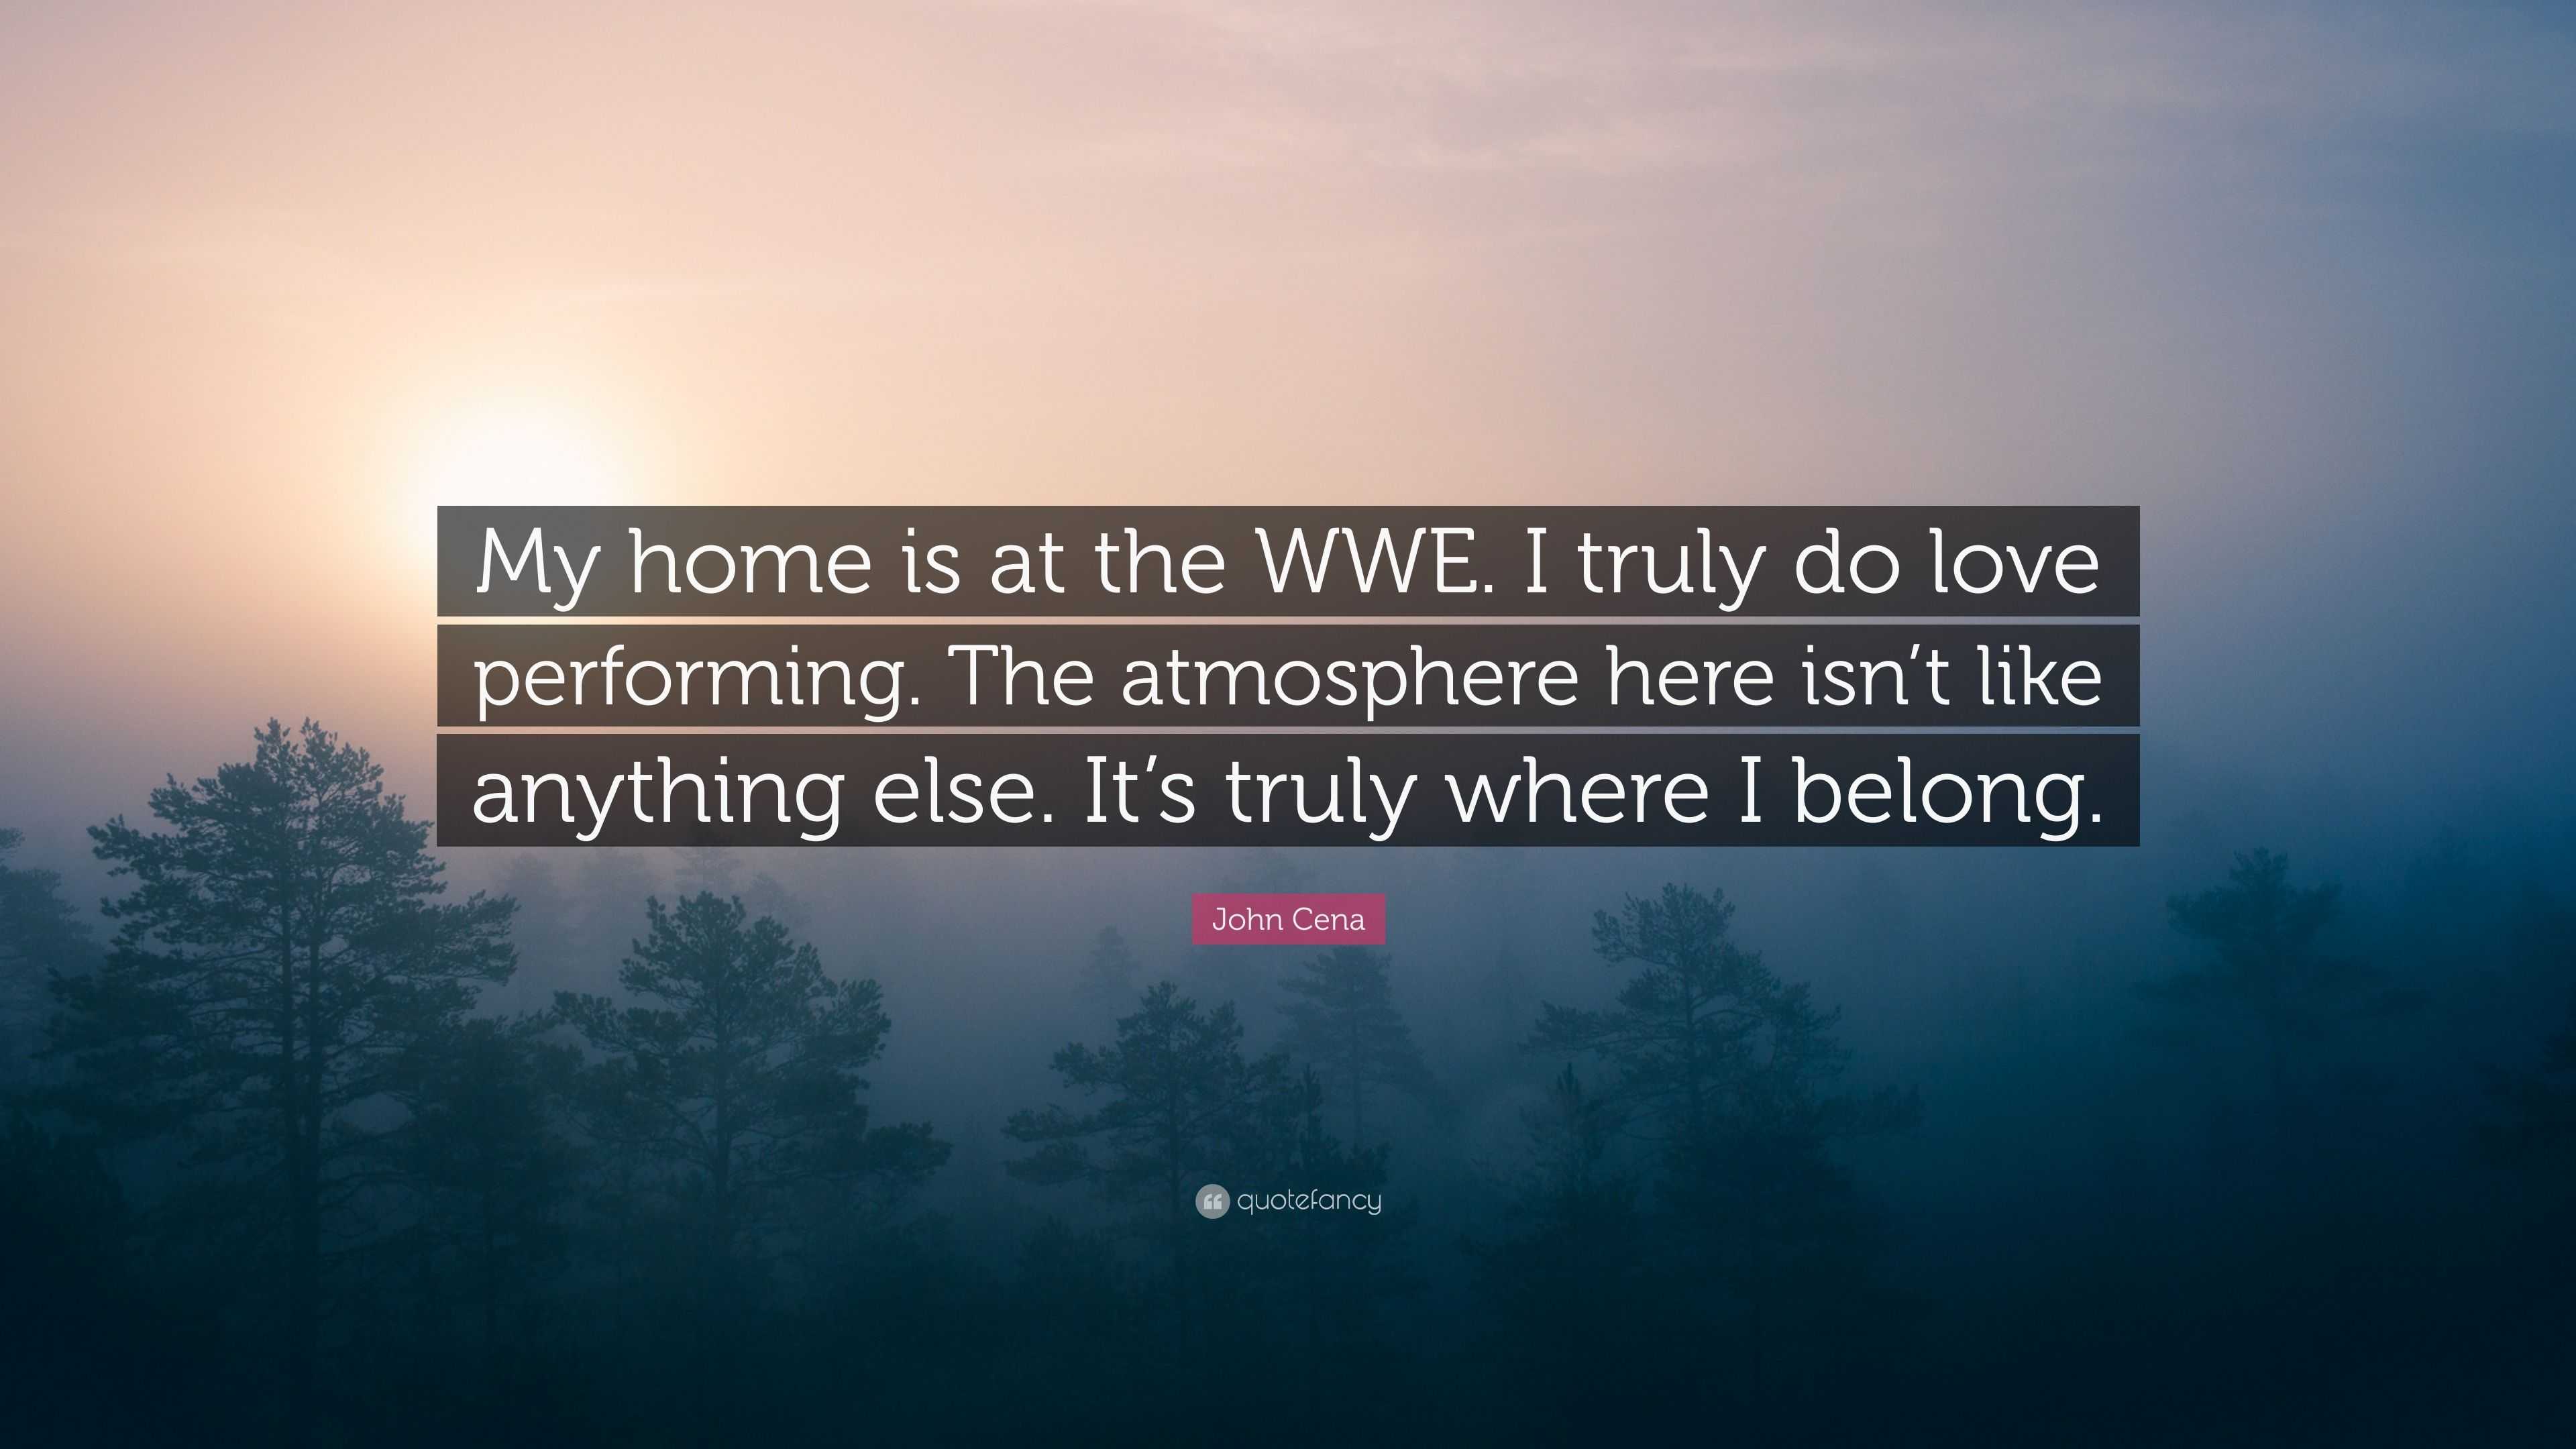 John Cena Quote: "My home is at the WWE. I truly do love ...